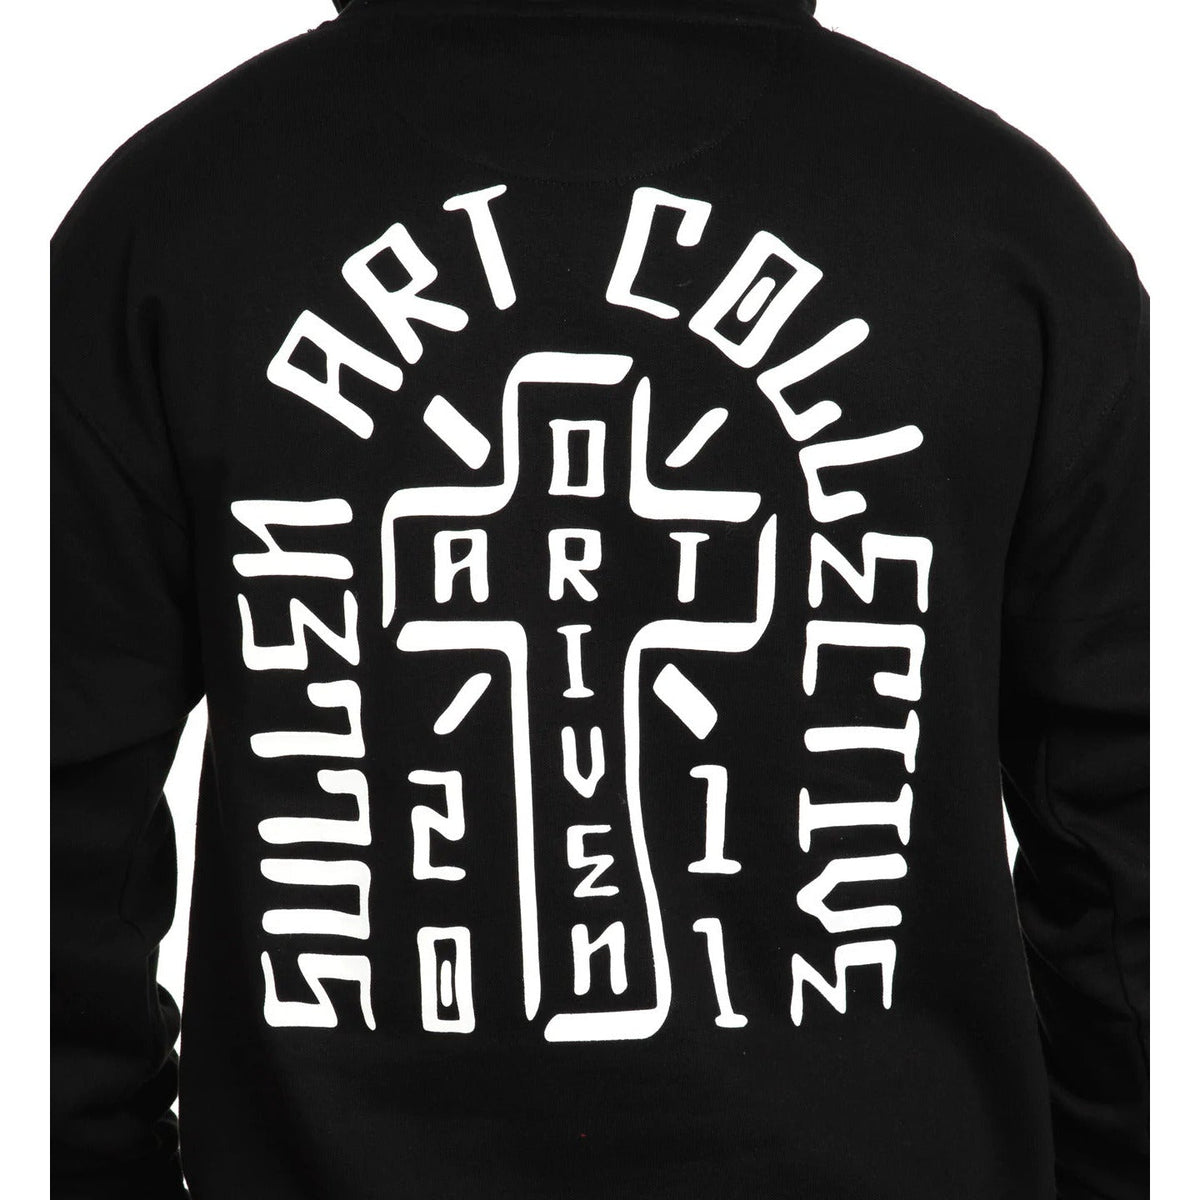 SULLEN-ART-COLLECTIVE-ART-DRIVEN-PULLOVER - PULLOVER HOODIE - Synik Clothing - synikclothing.com